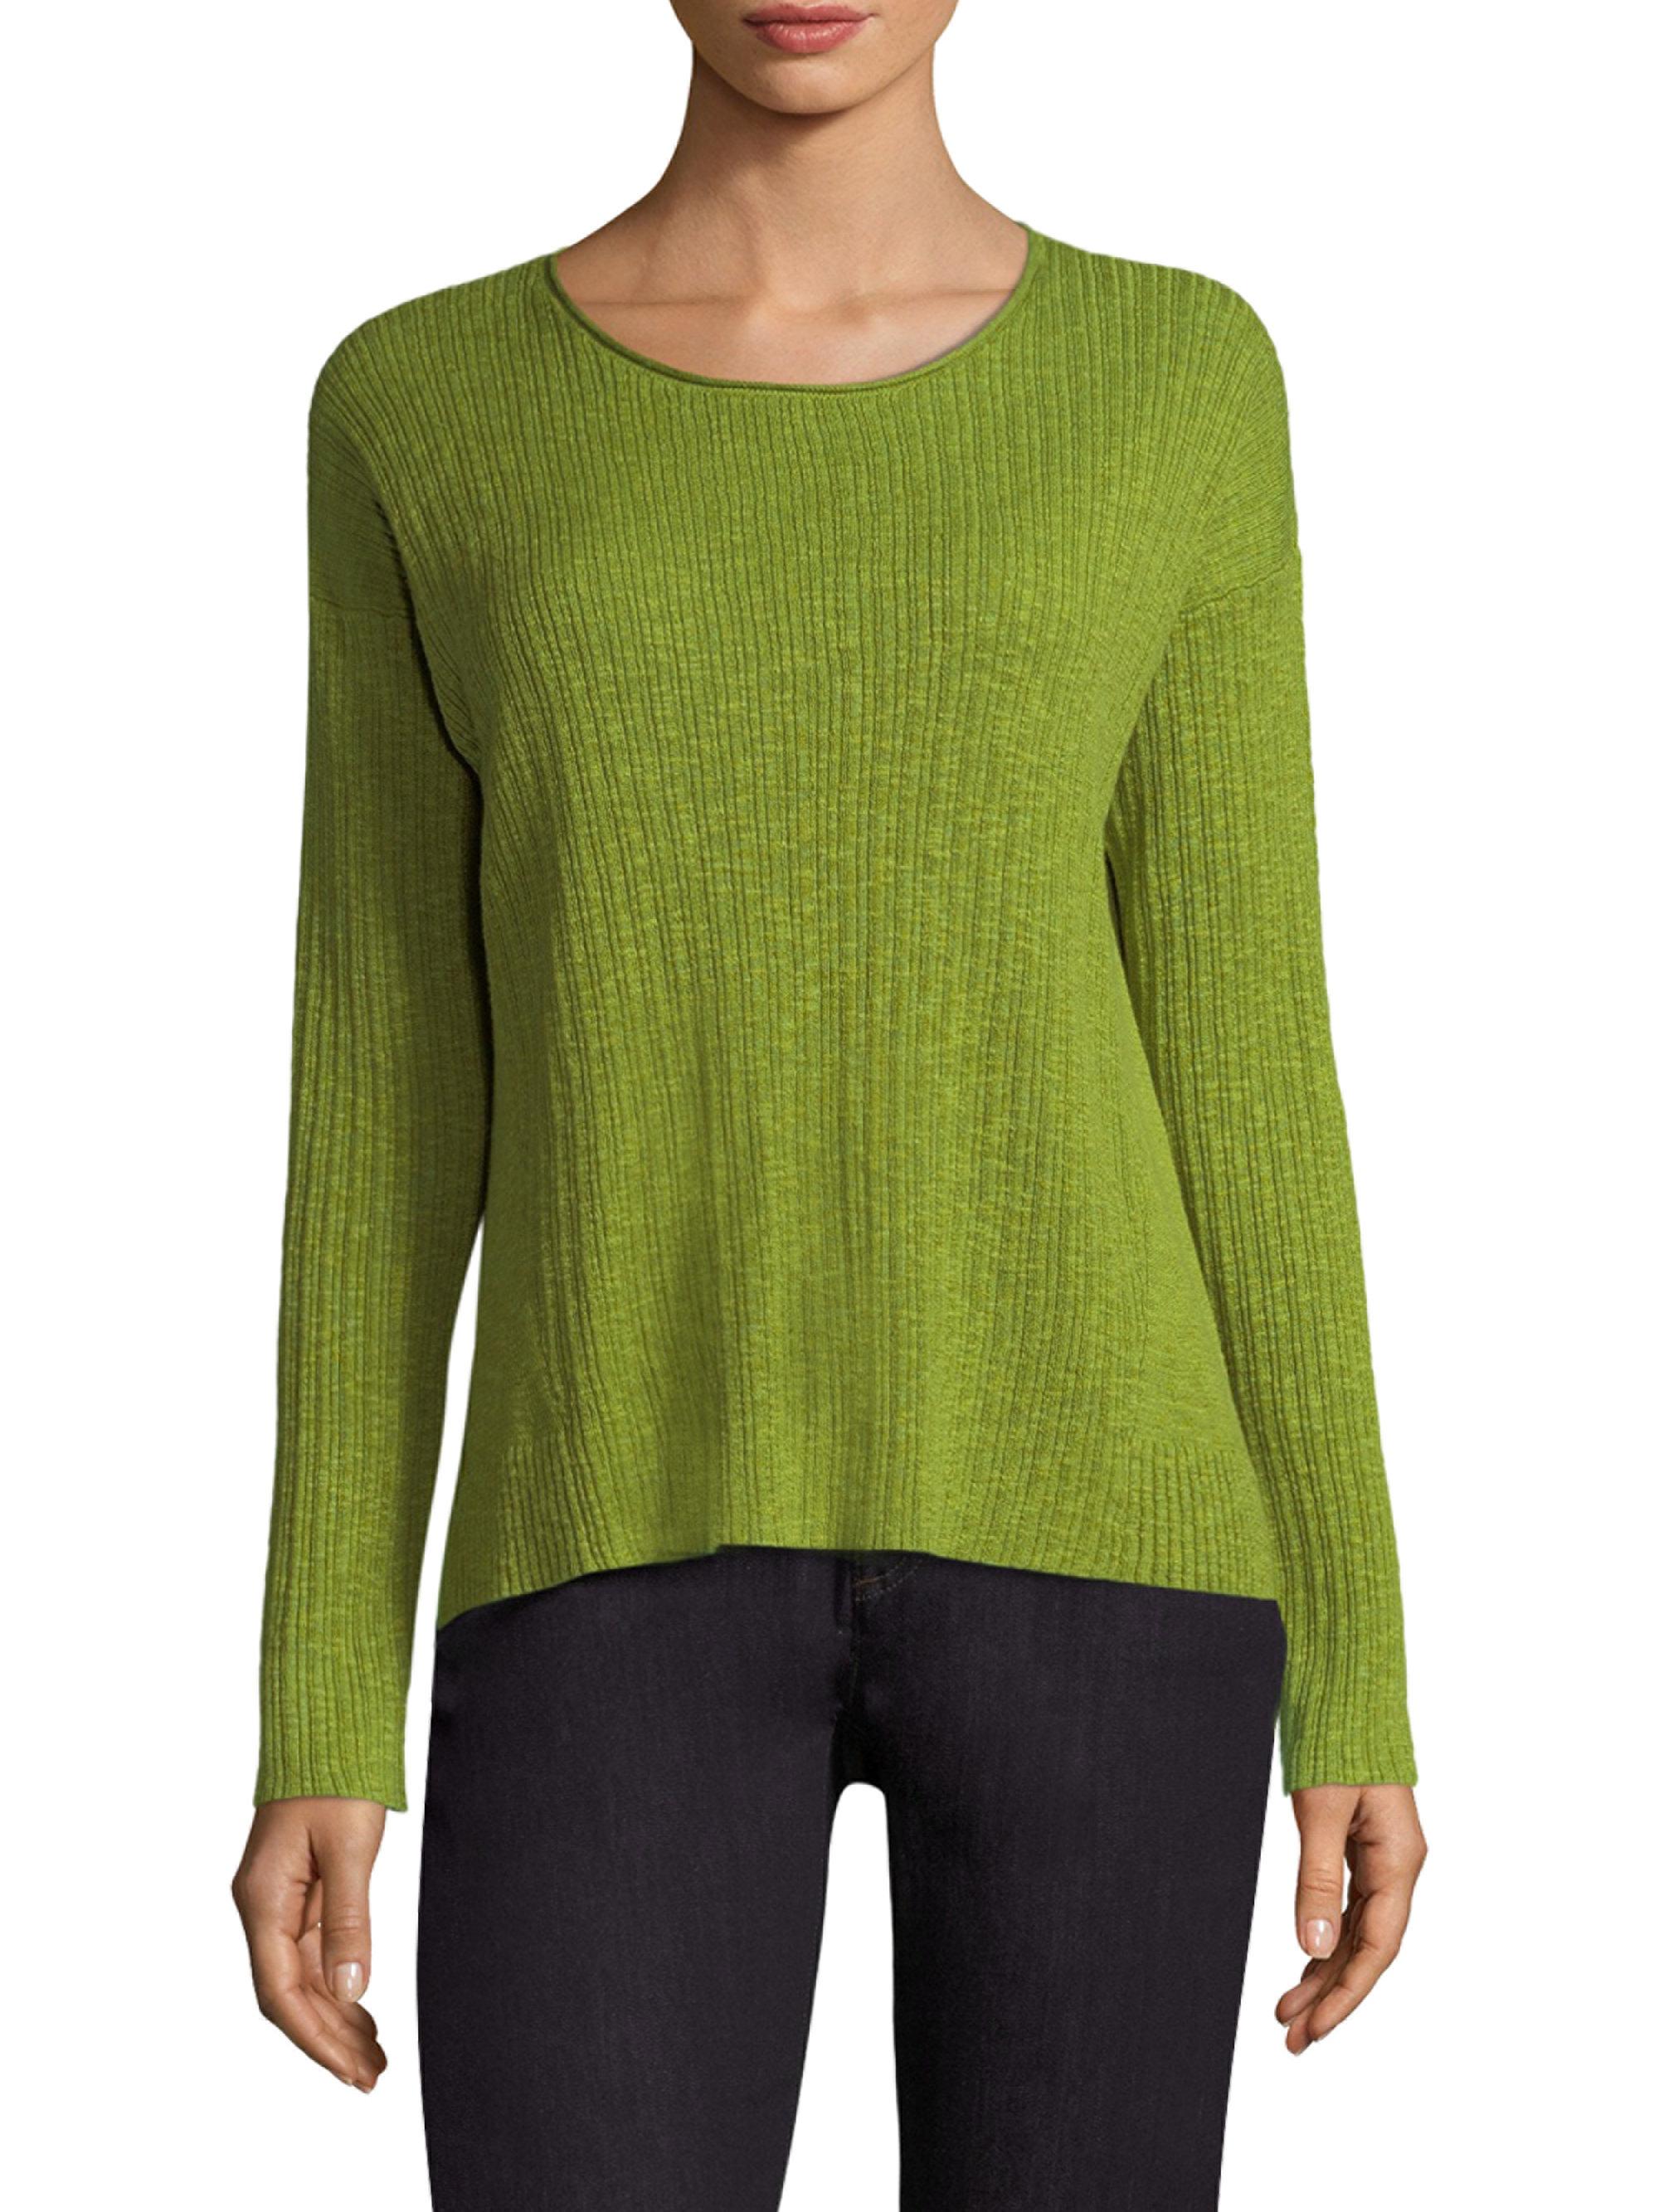 Lyst - Eileen Fisher Ribbed Sweater in Green